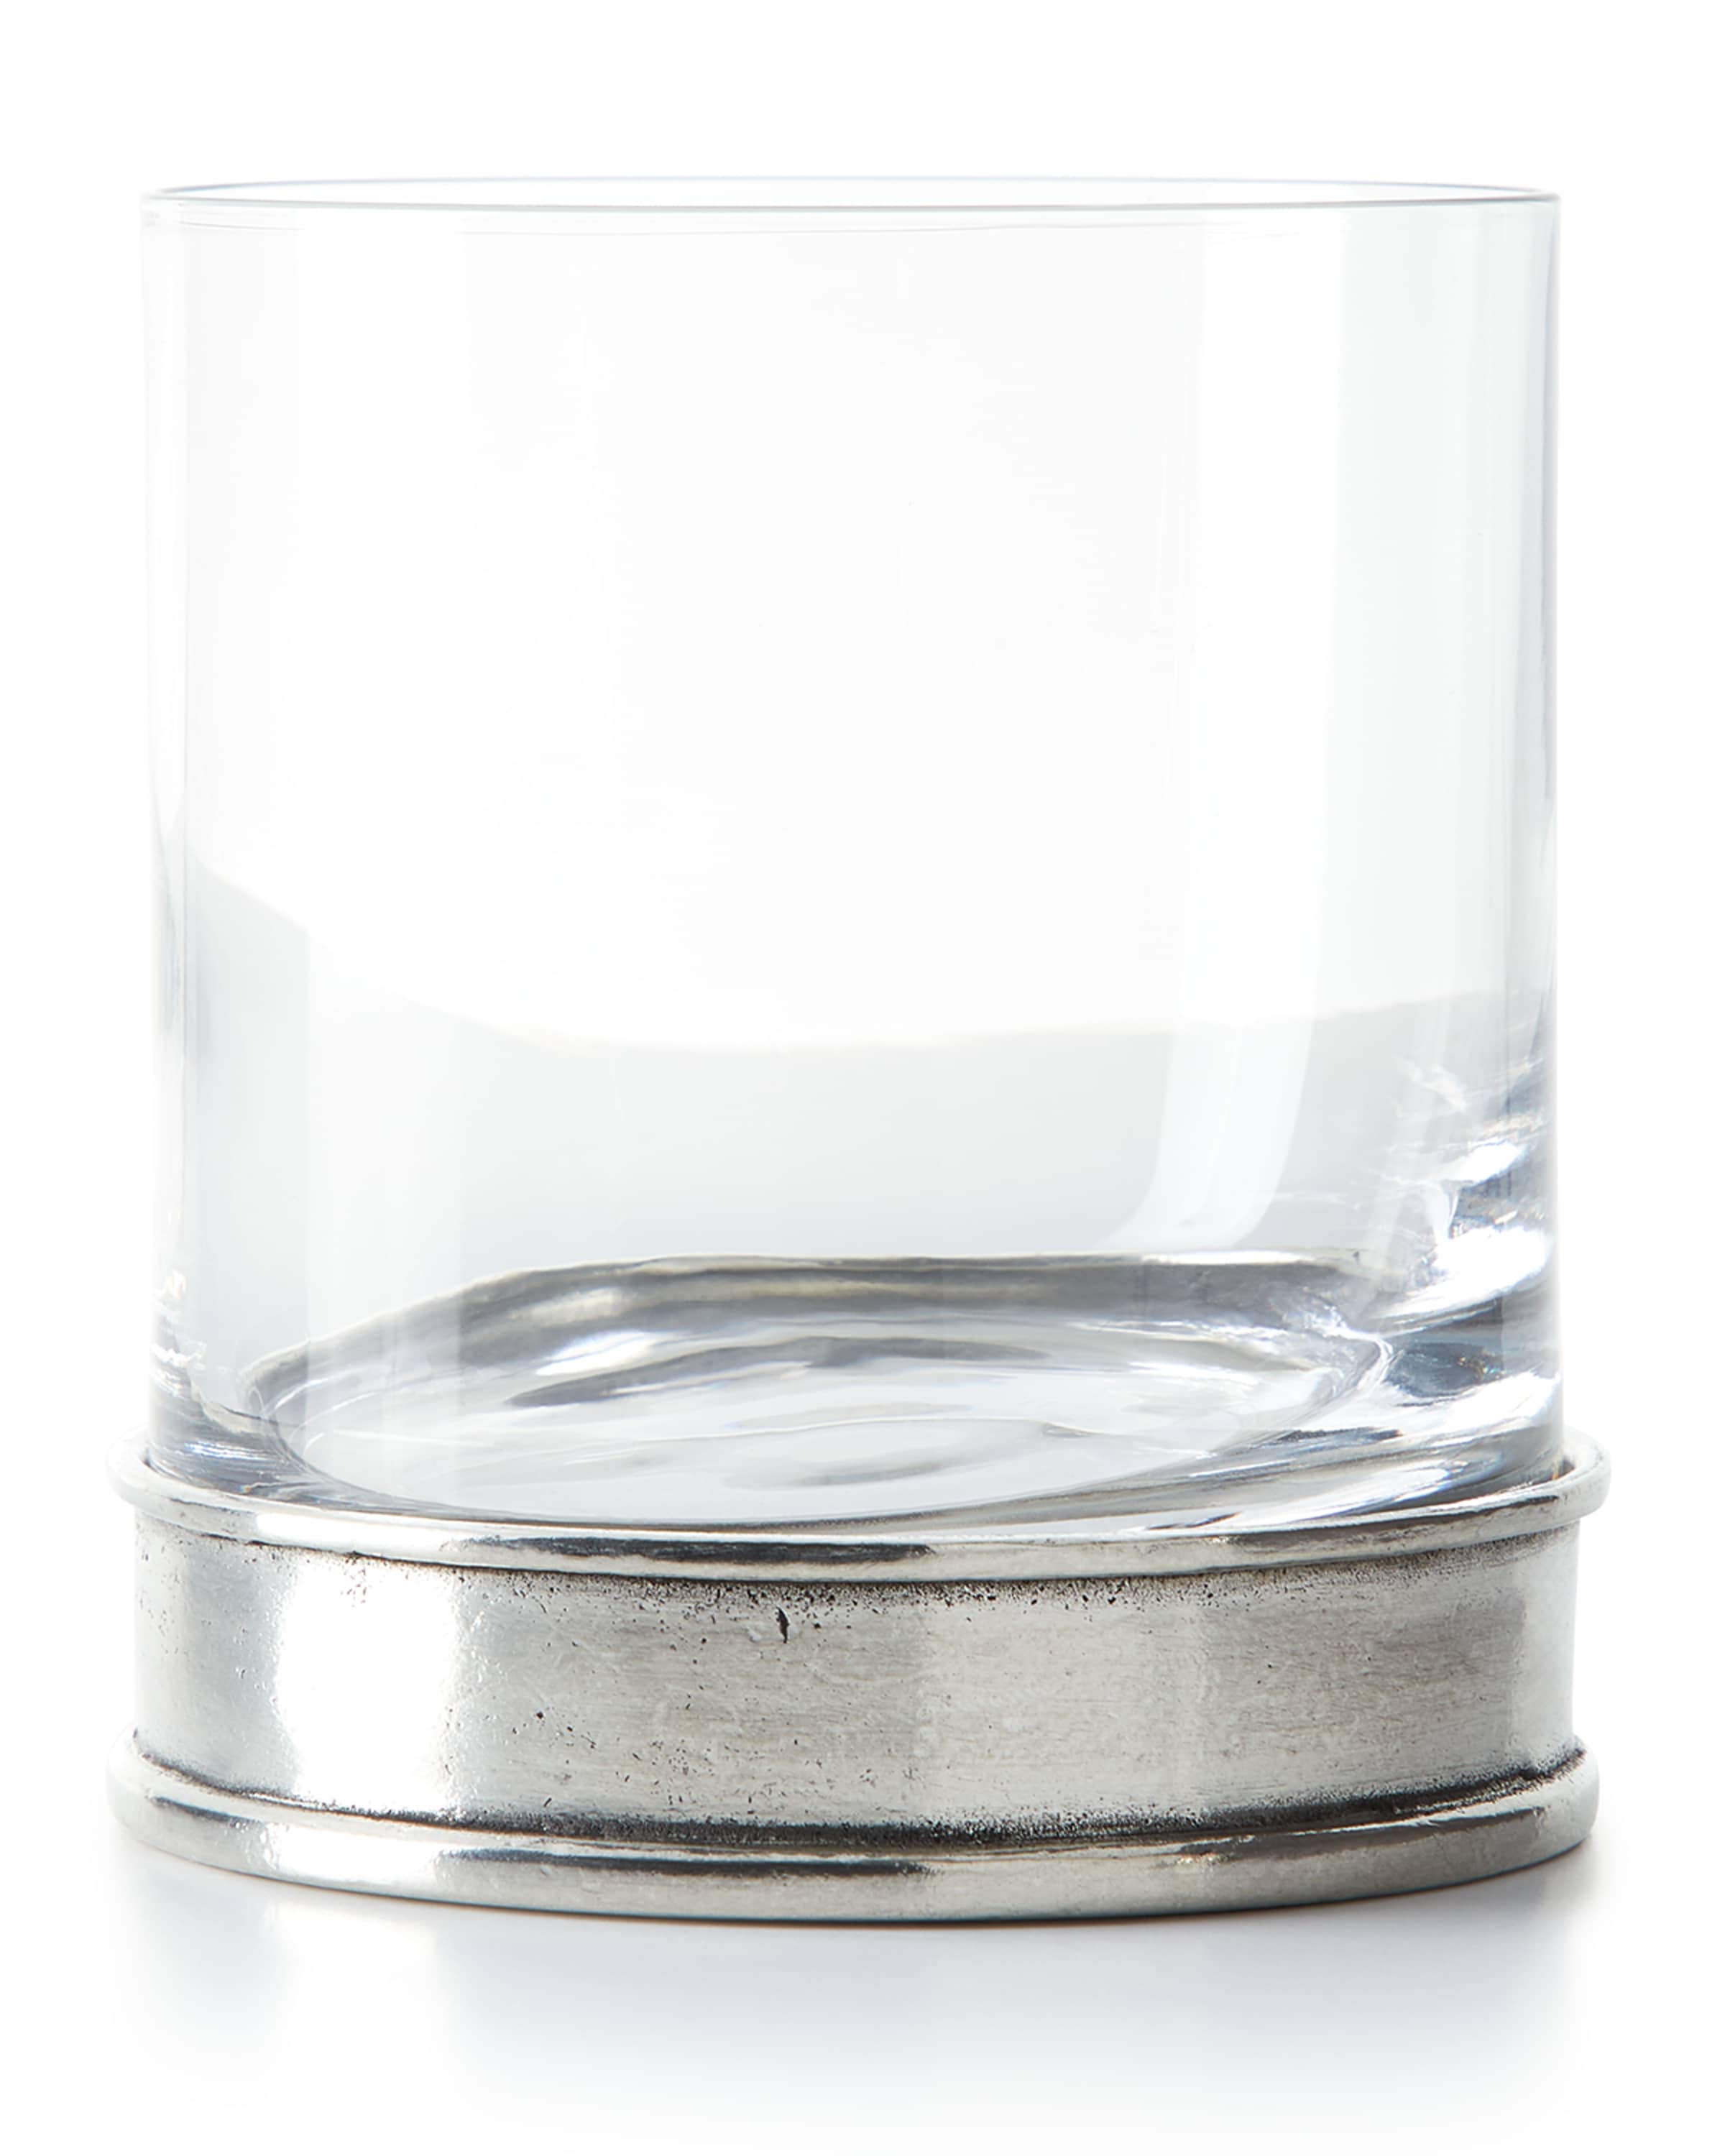 Neiman Marcus Pewter and Glass Double Old-Fashioned